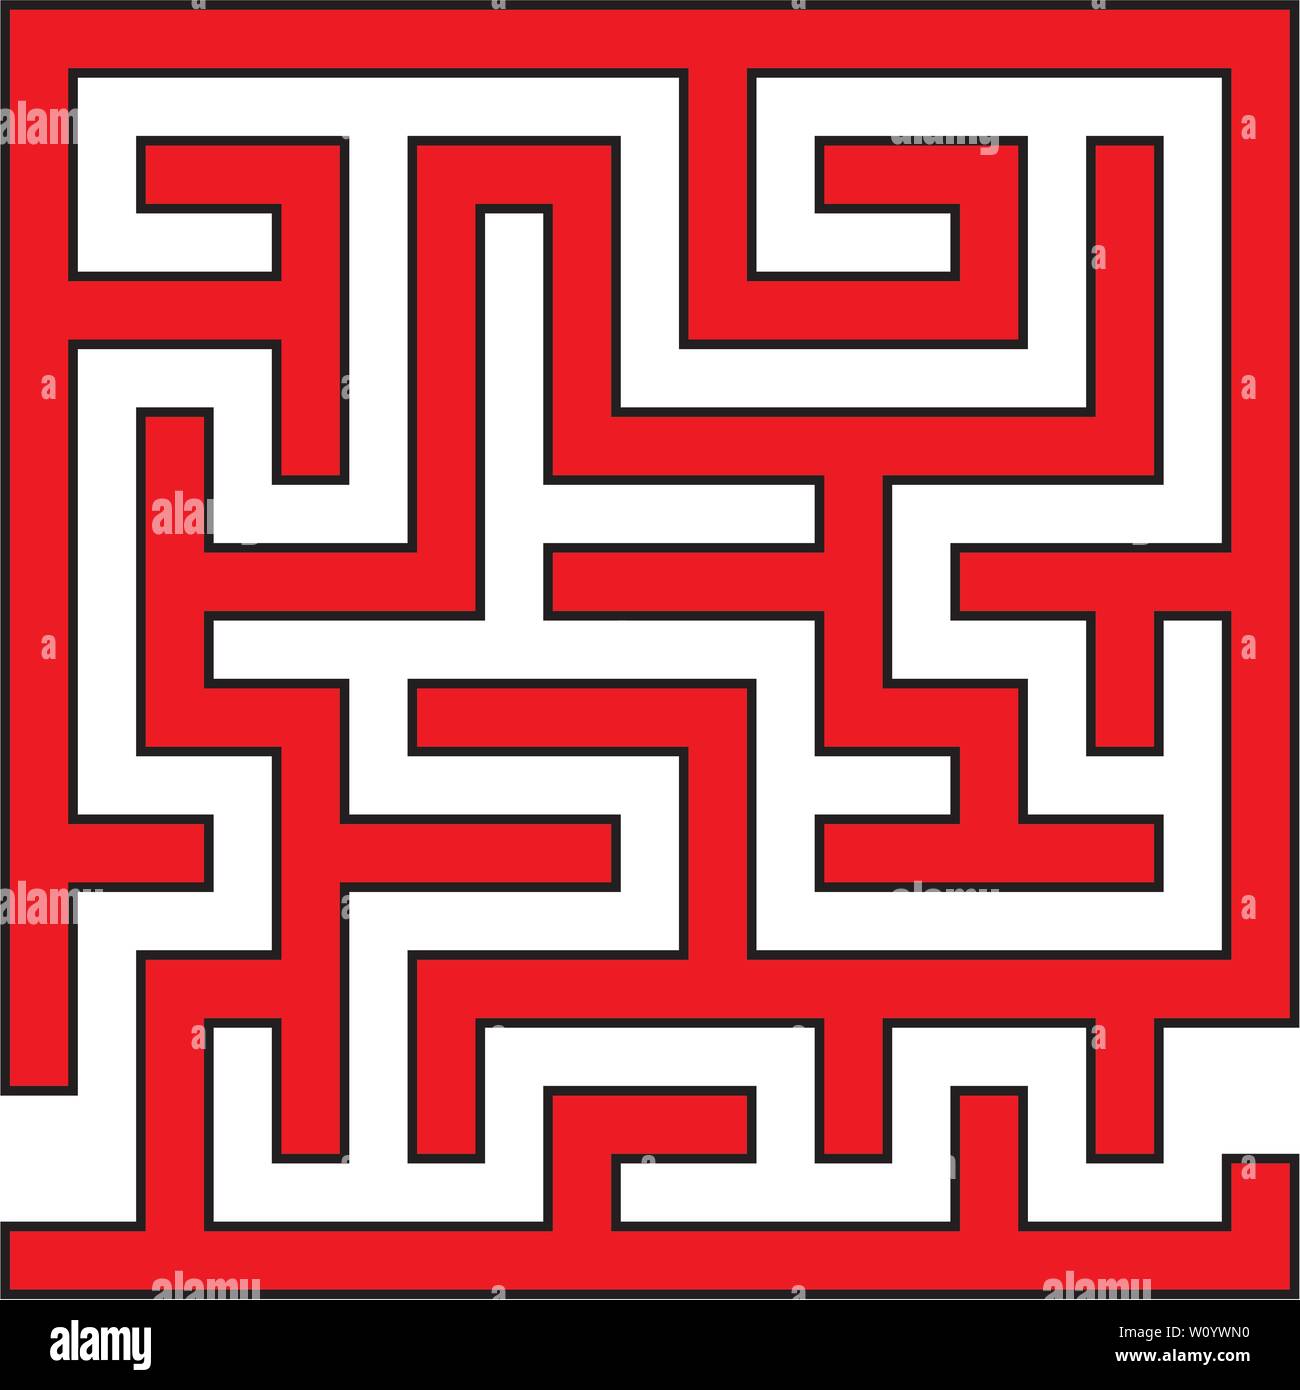 Vector Illustration of Simple Labyrinth Maze Stock Vector